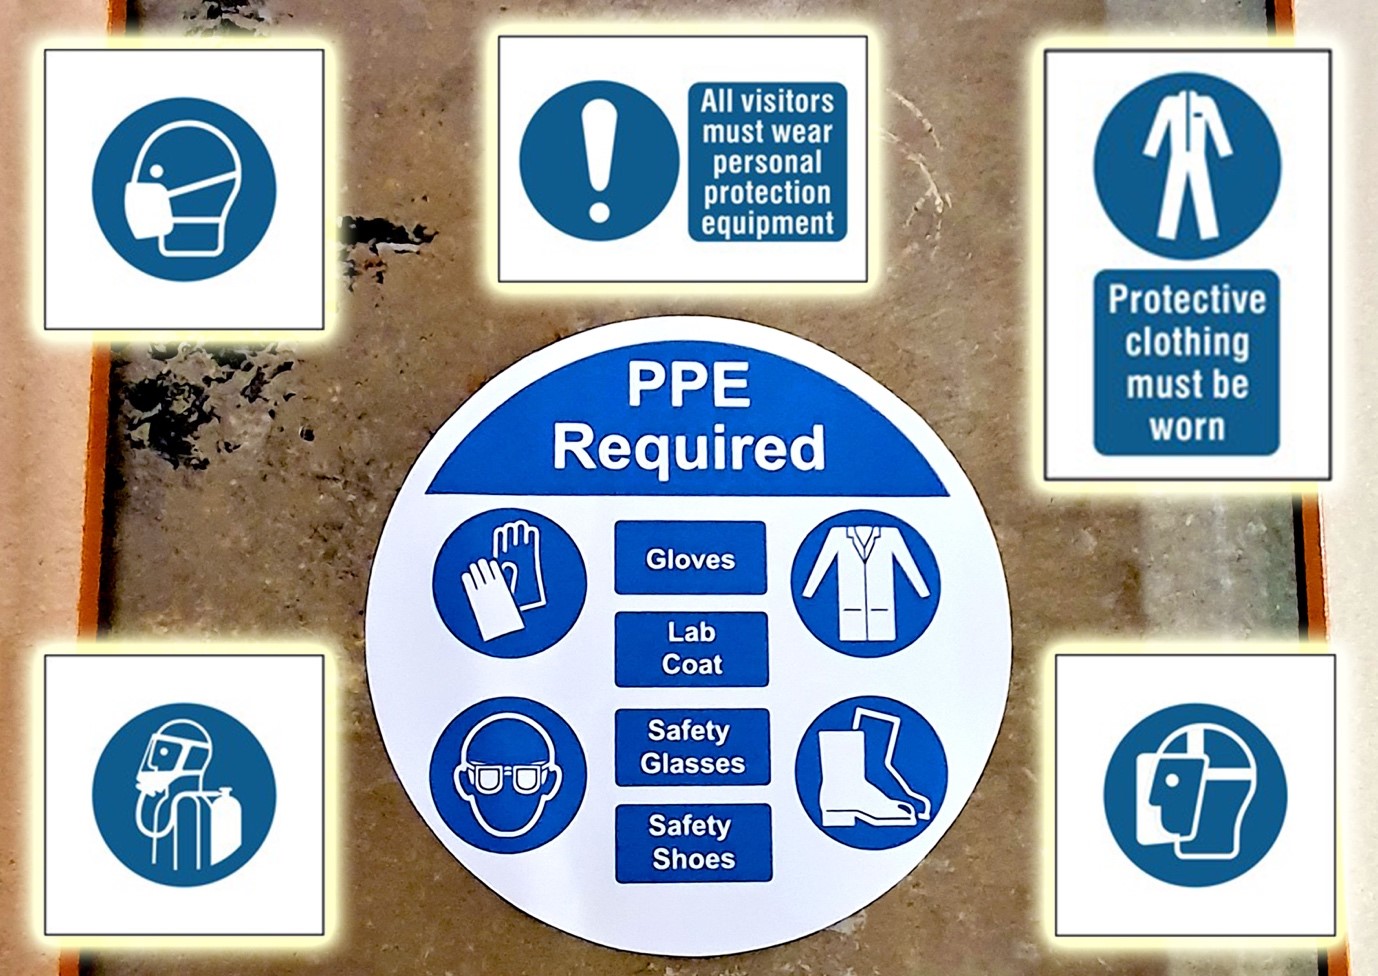 Protective Clothing Must Be Worn Signs - from Key Signs UK